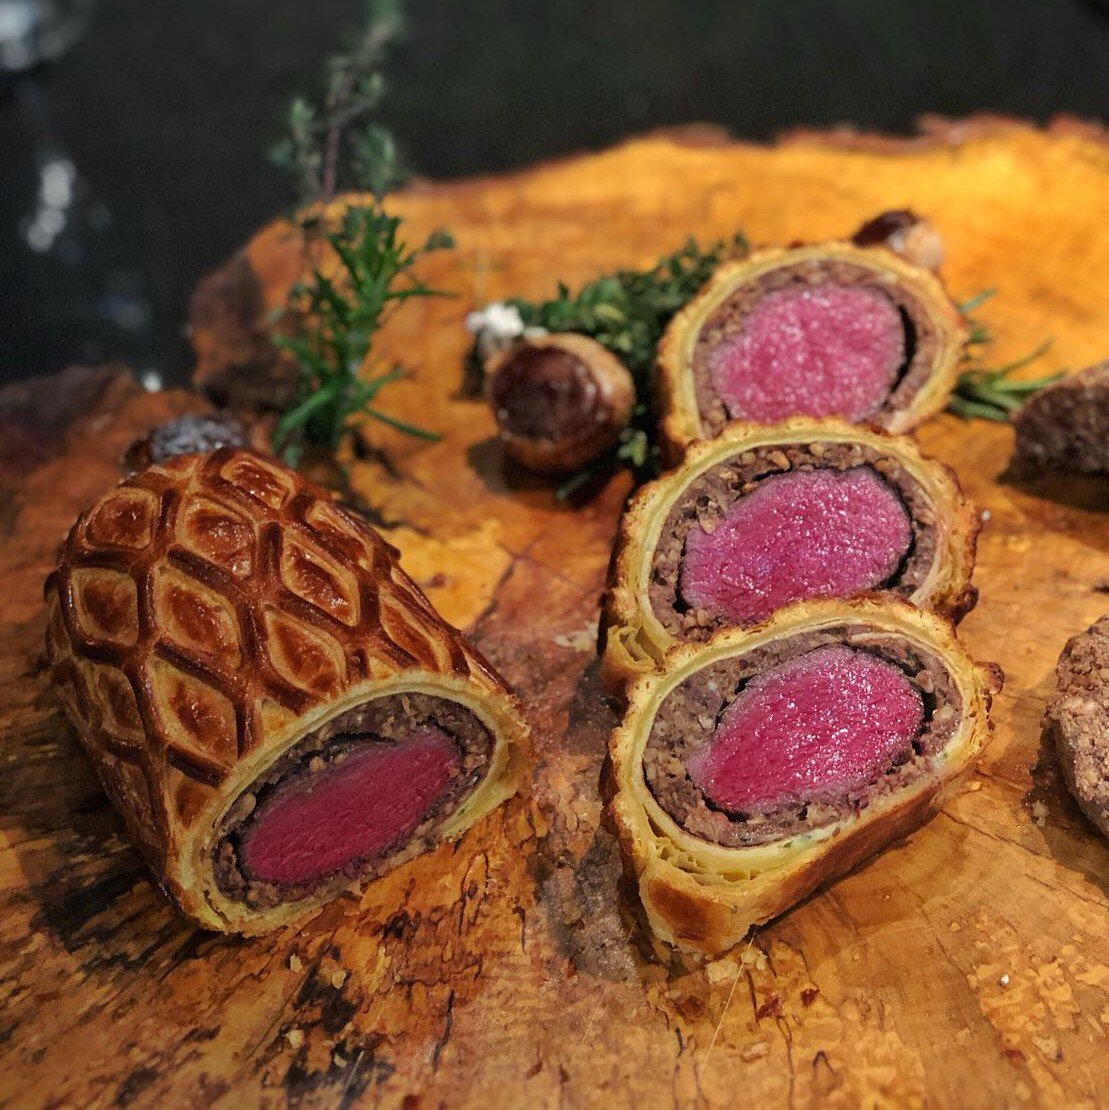 A beautiful #burnsnight twist on the classic with Highland venison - nice work @savoygrill !